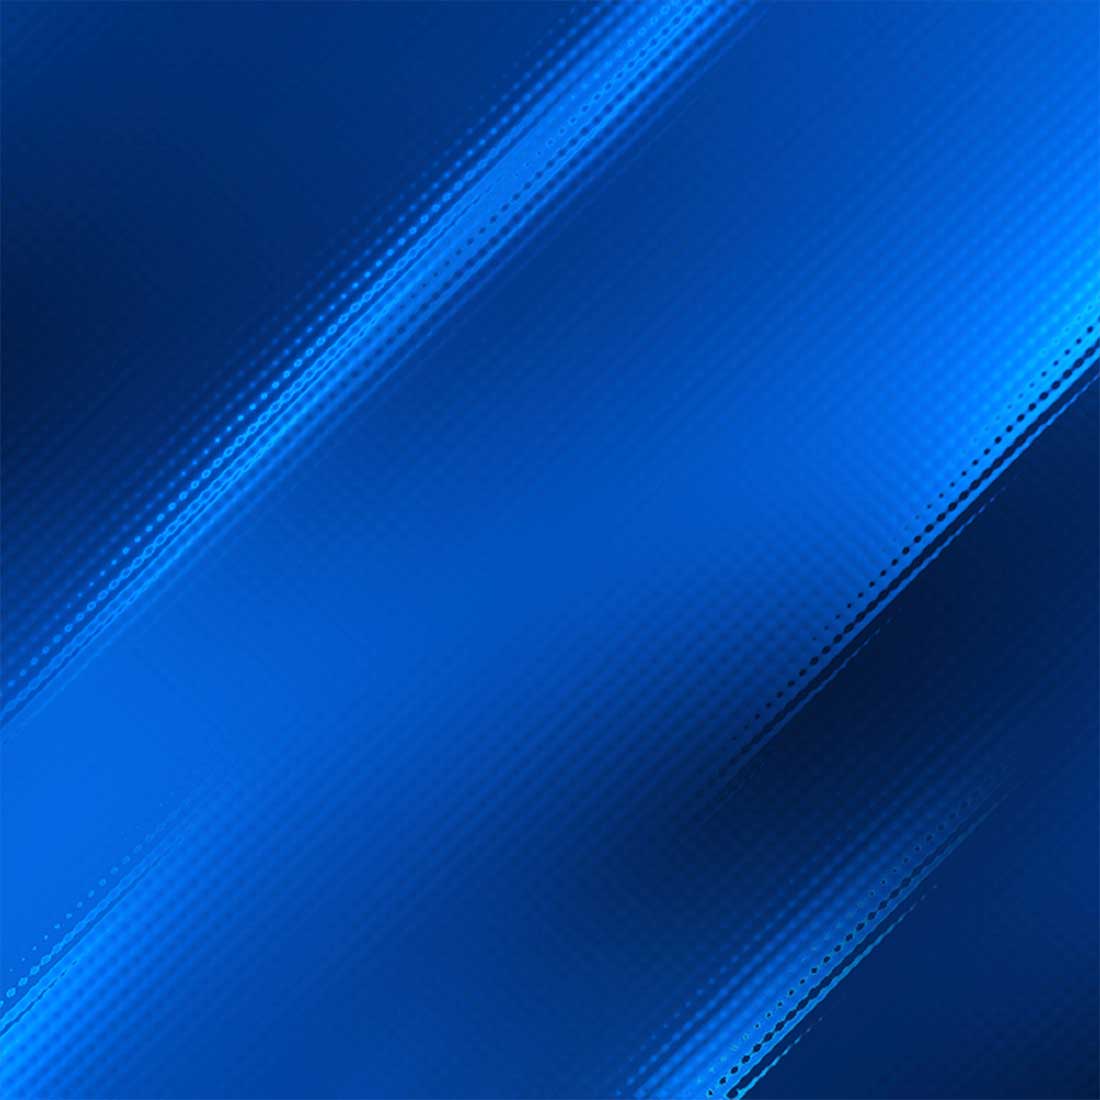 Abstract Gradient Background Luxury Vivid Blurred Colorful Texture Wallpaper Photo - free - cover image.